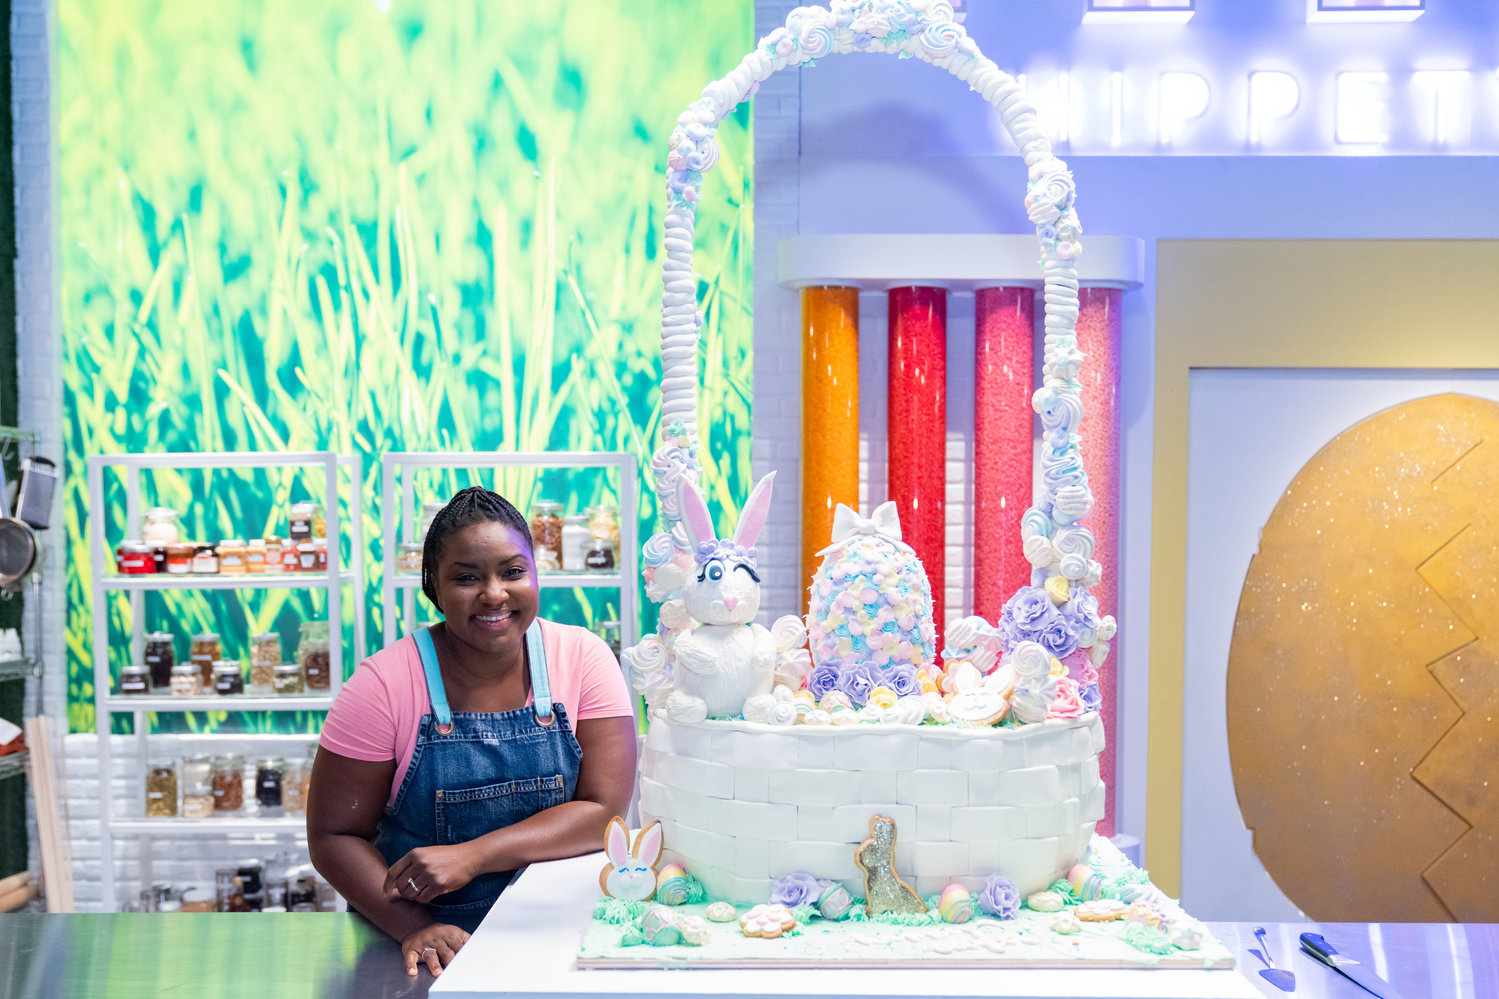 West Hempstead Bakery owner Sydney Perry, a South Floral Park resident, with her 4-foot-tall Easter basket cake, for which she was named champion in the Food Network’s “Spring Baking Championship: Easter” competition.